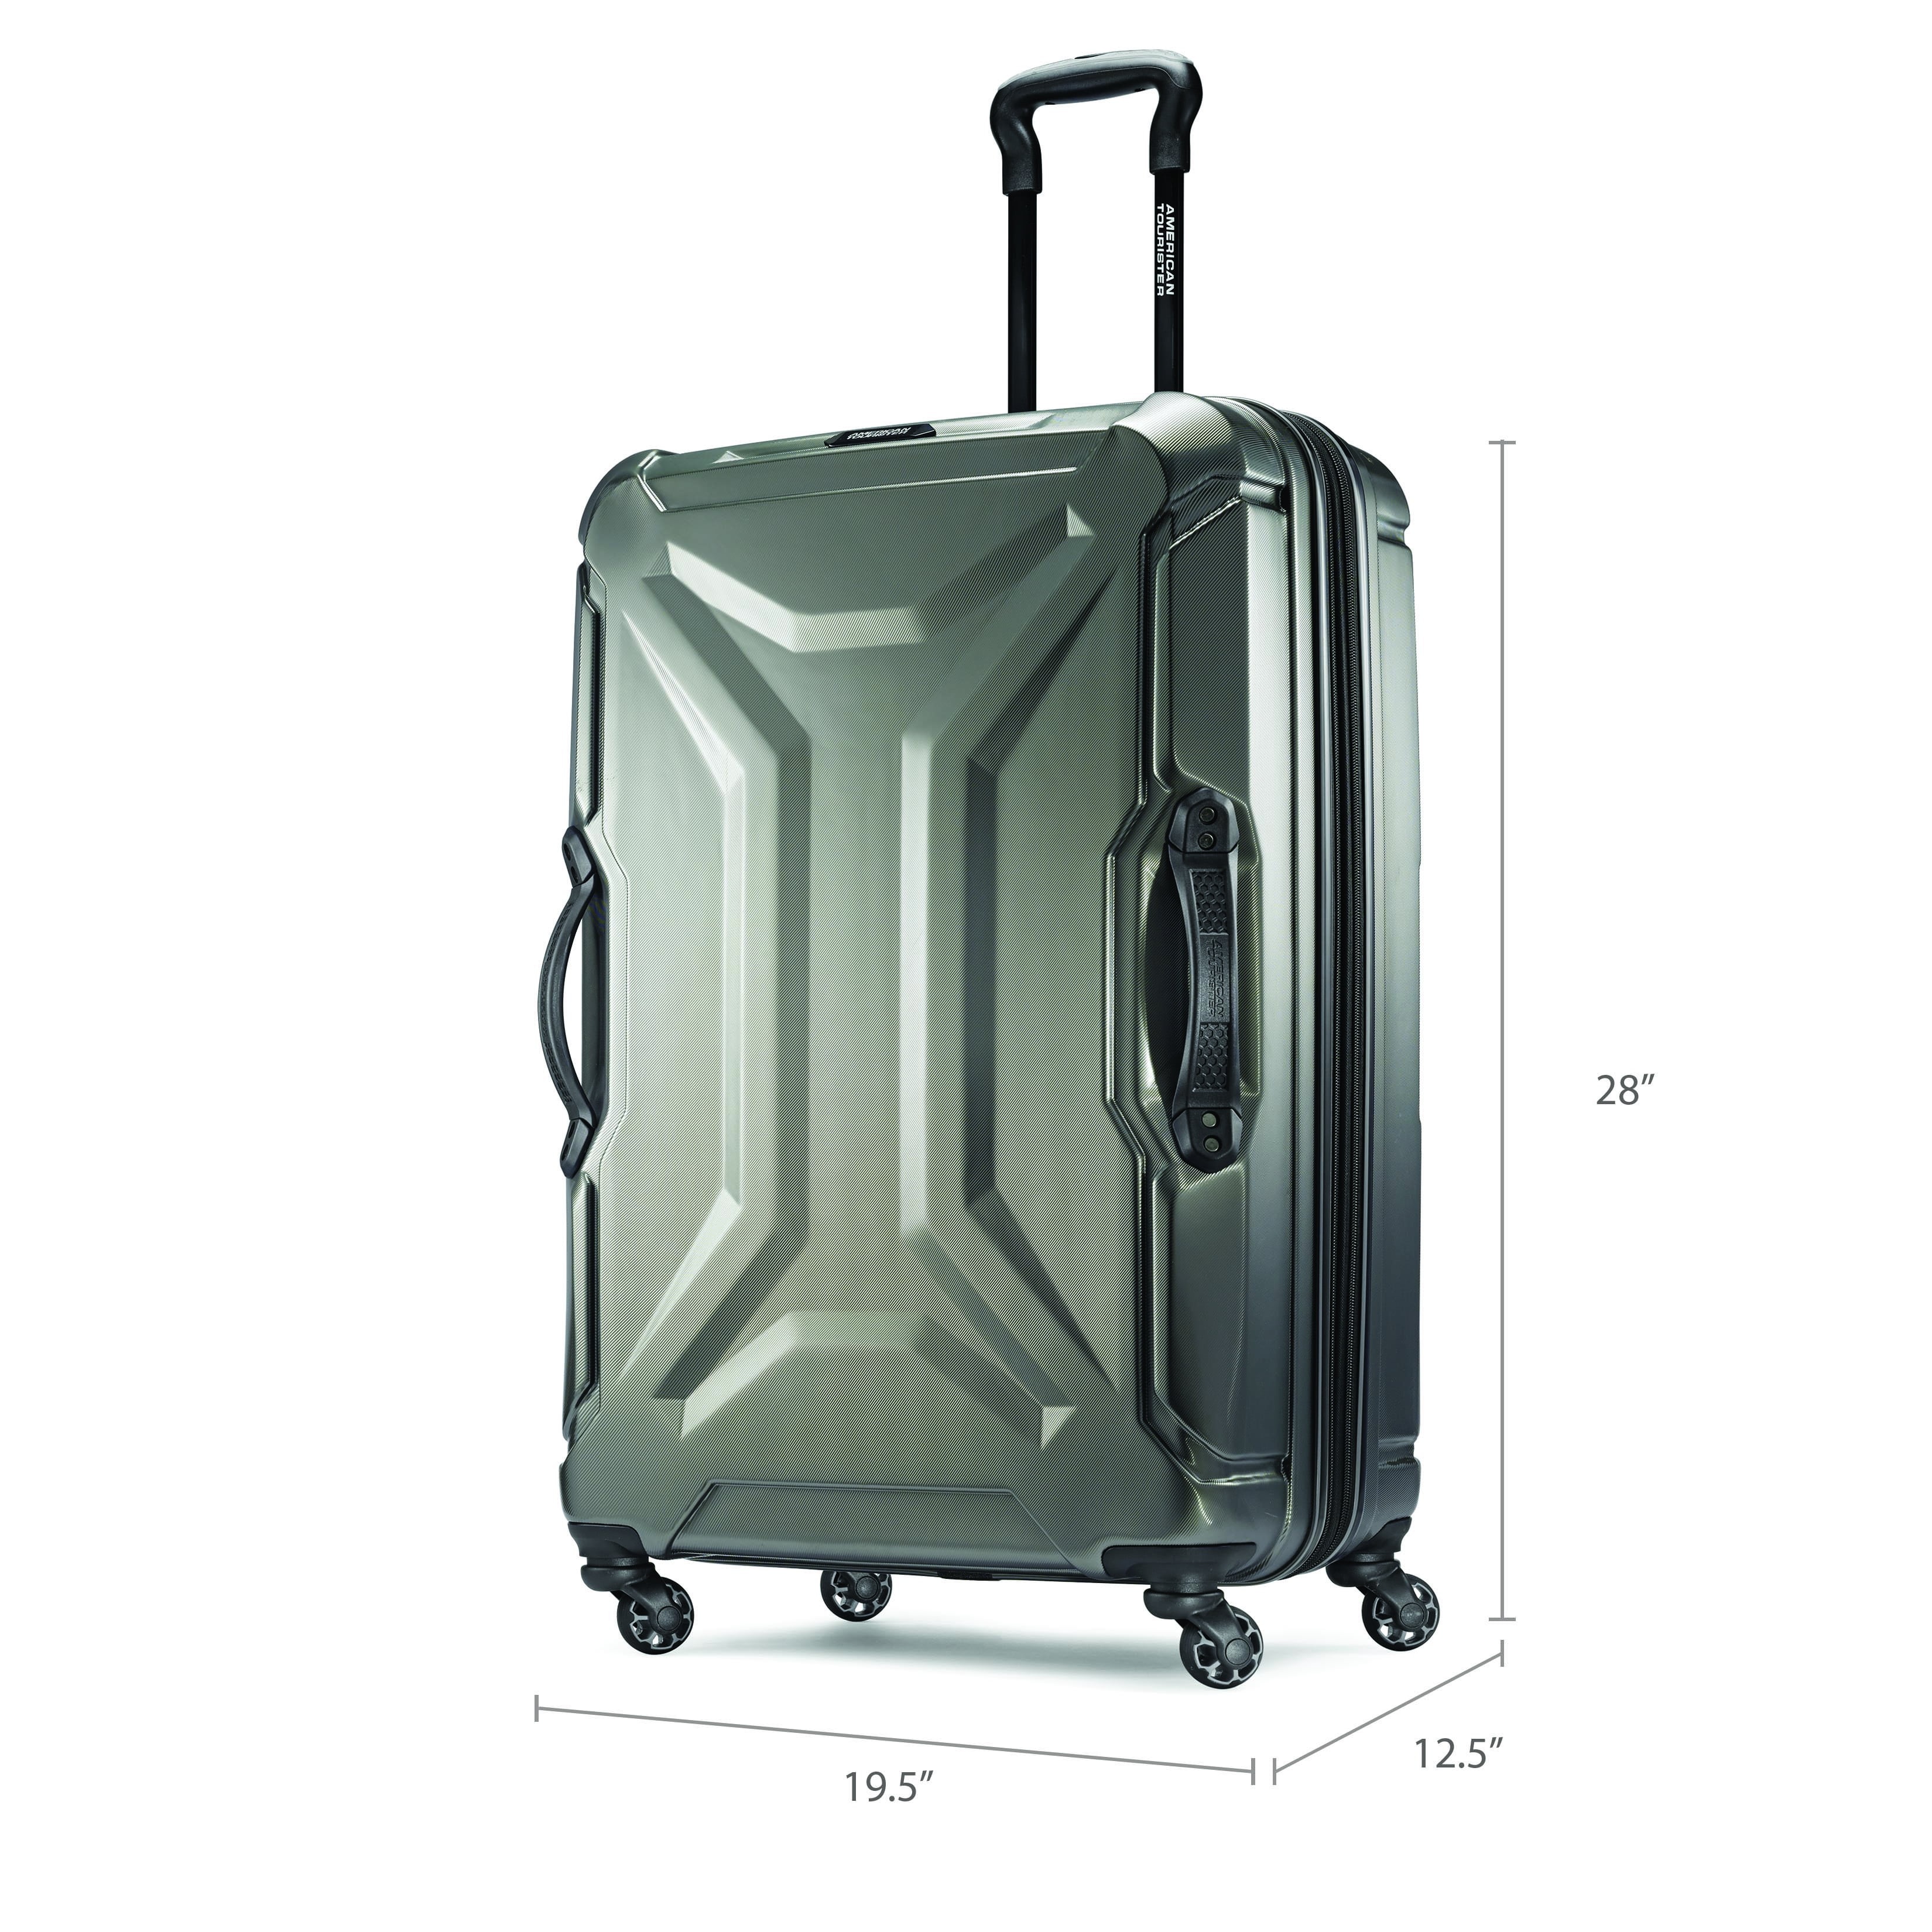 American Tourister Cargo 28" Hardside Spinner Luggage, -